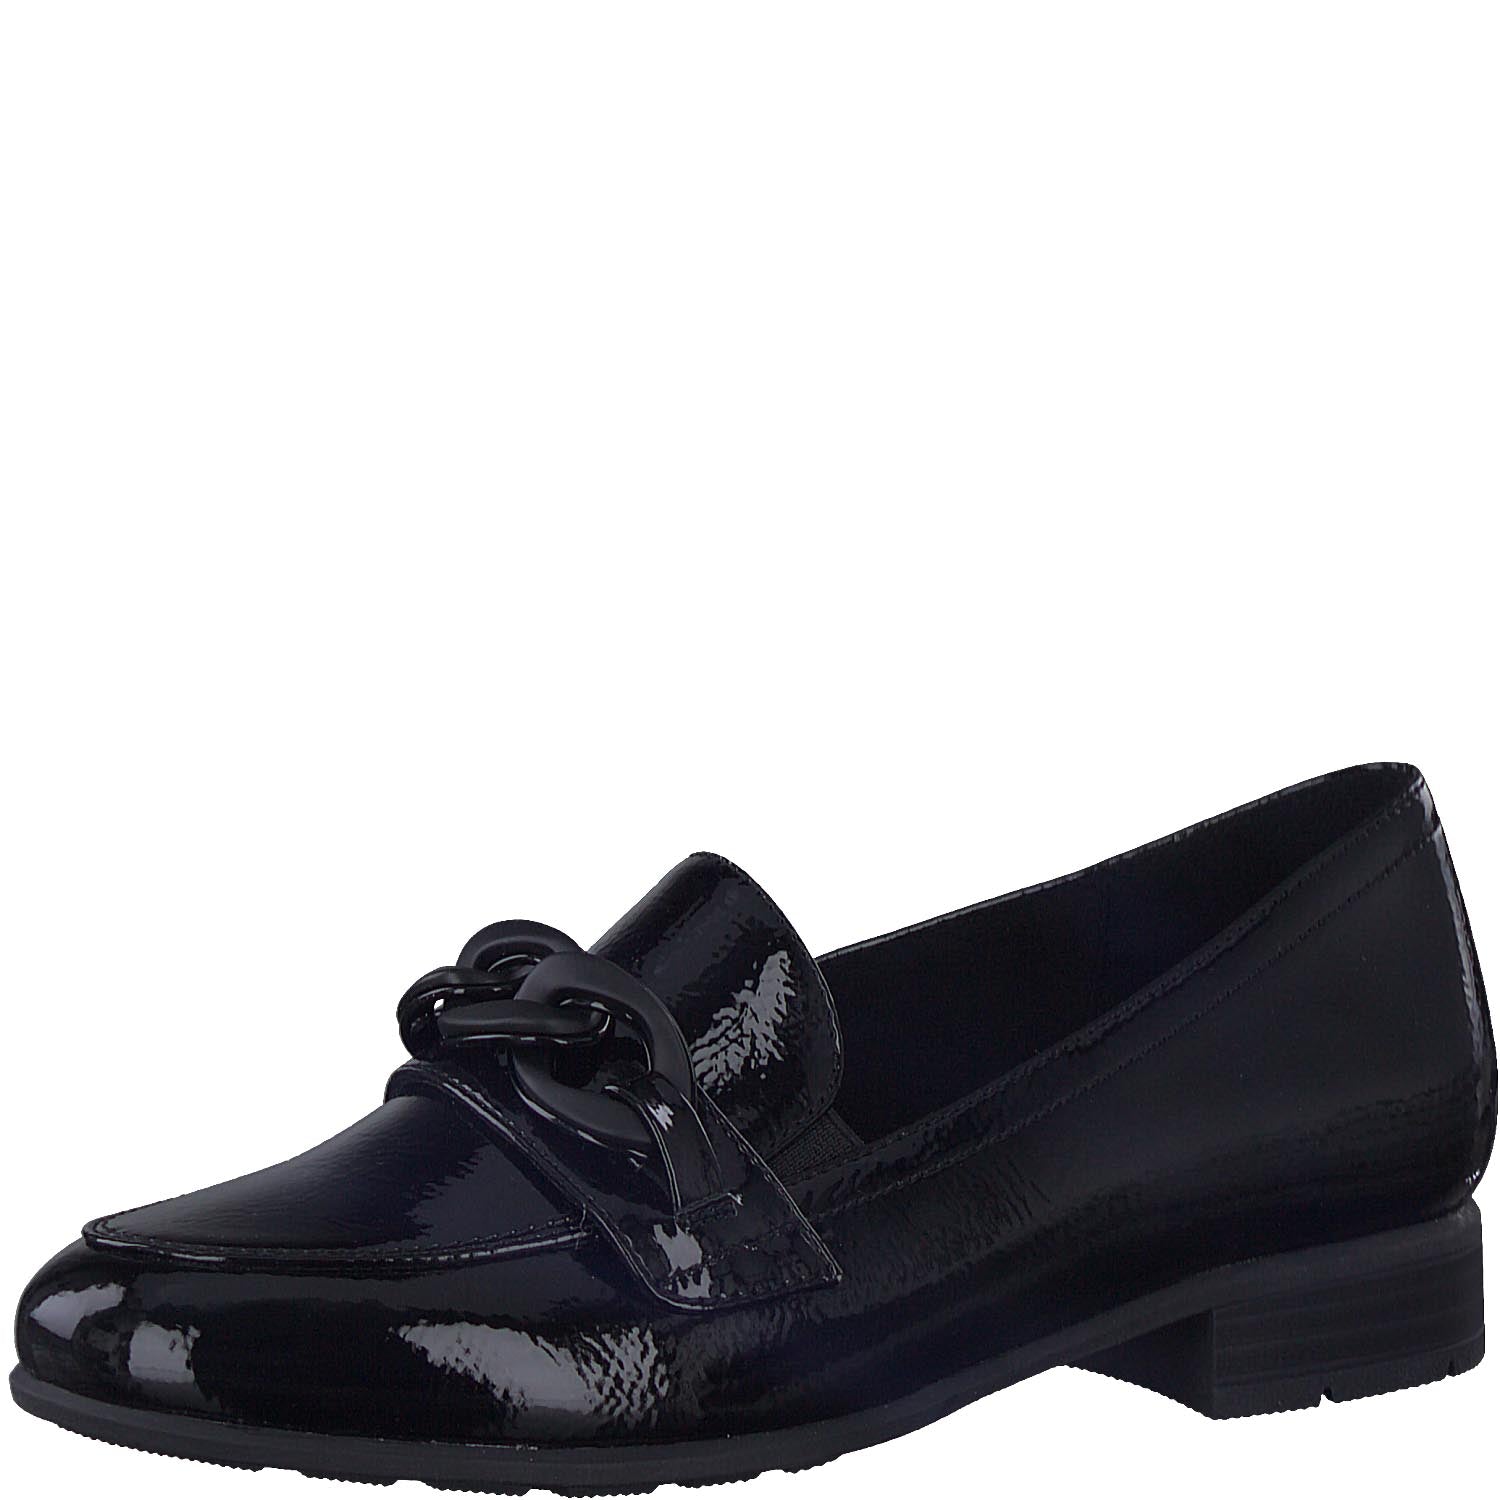 Angled view of Jana Black Patent Loafer highlighting the matte chain-link.